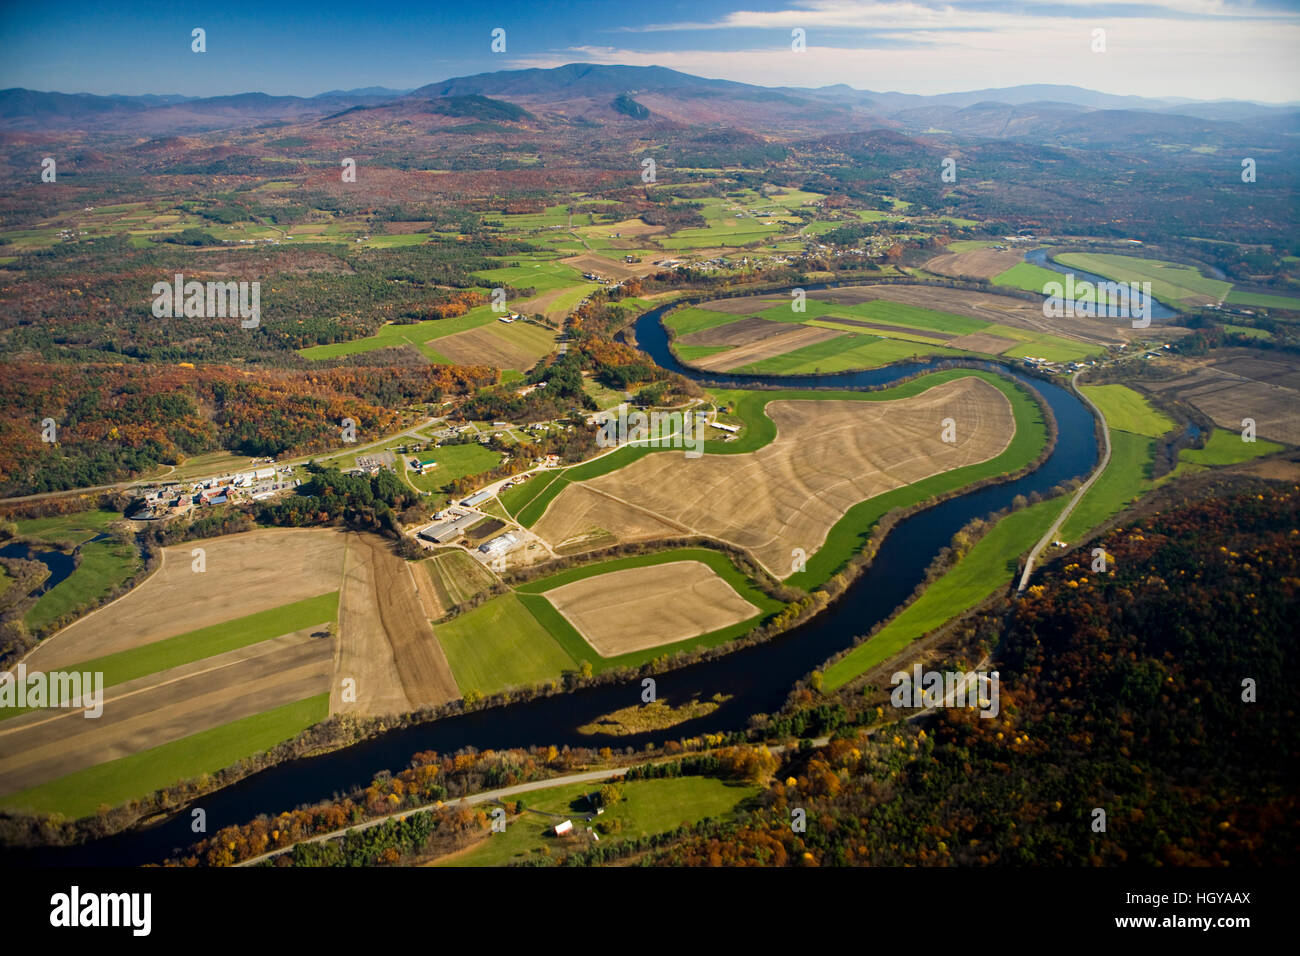 The Connecticut River flows through farmland in Newbury, Vermont and Haverhill, New Hampshire.  Mount Moosilaukee is in the distance. Aerial. Stock Photo